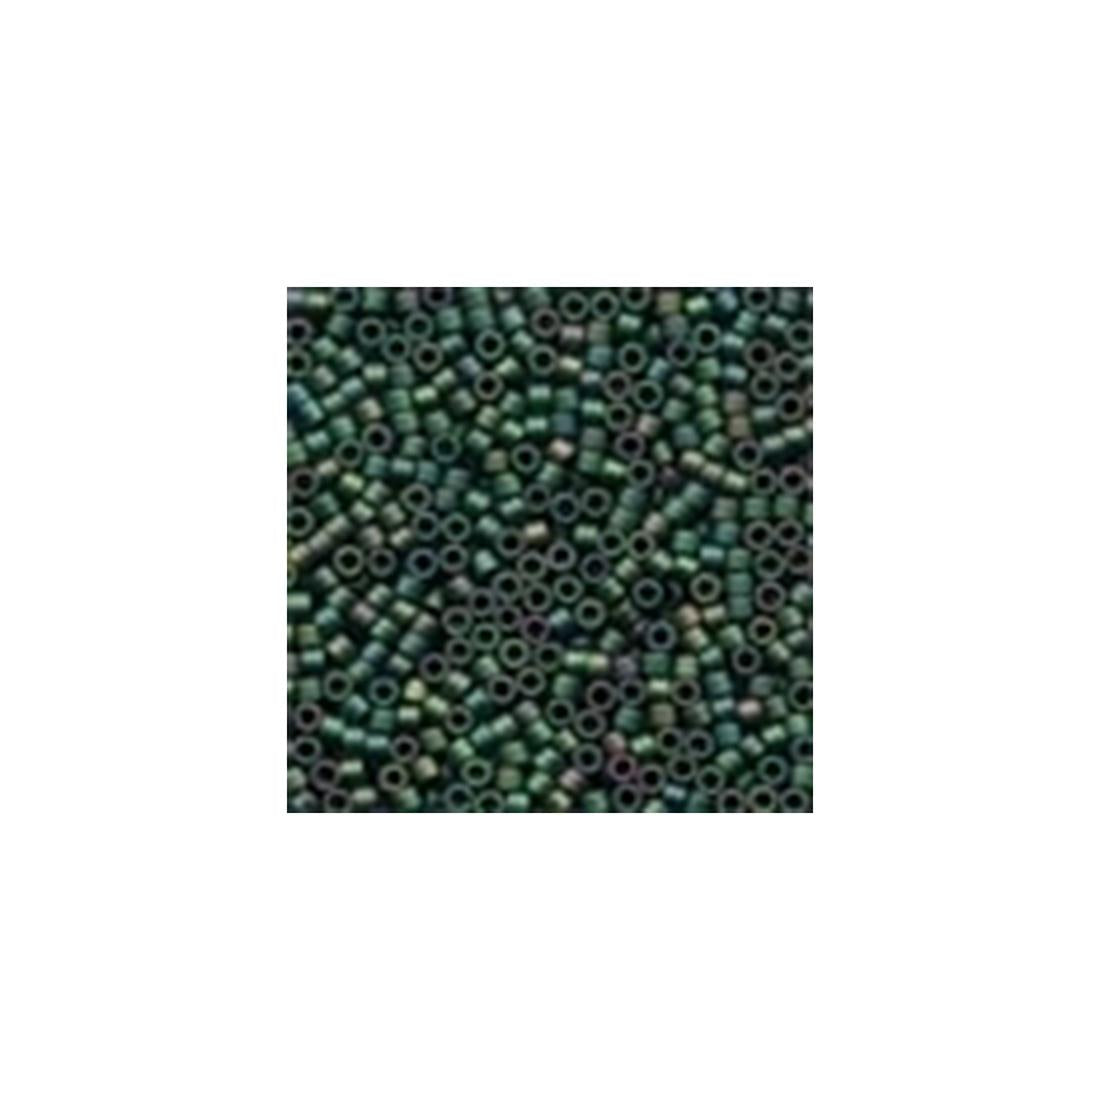 MHB - Size 12/0 Magnifica Beads - 10040 - Autumn Green